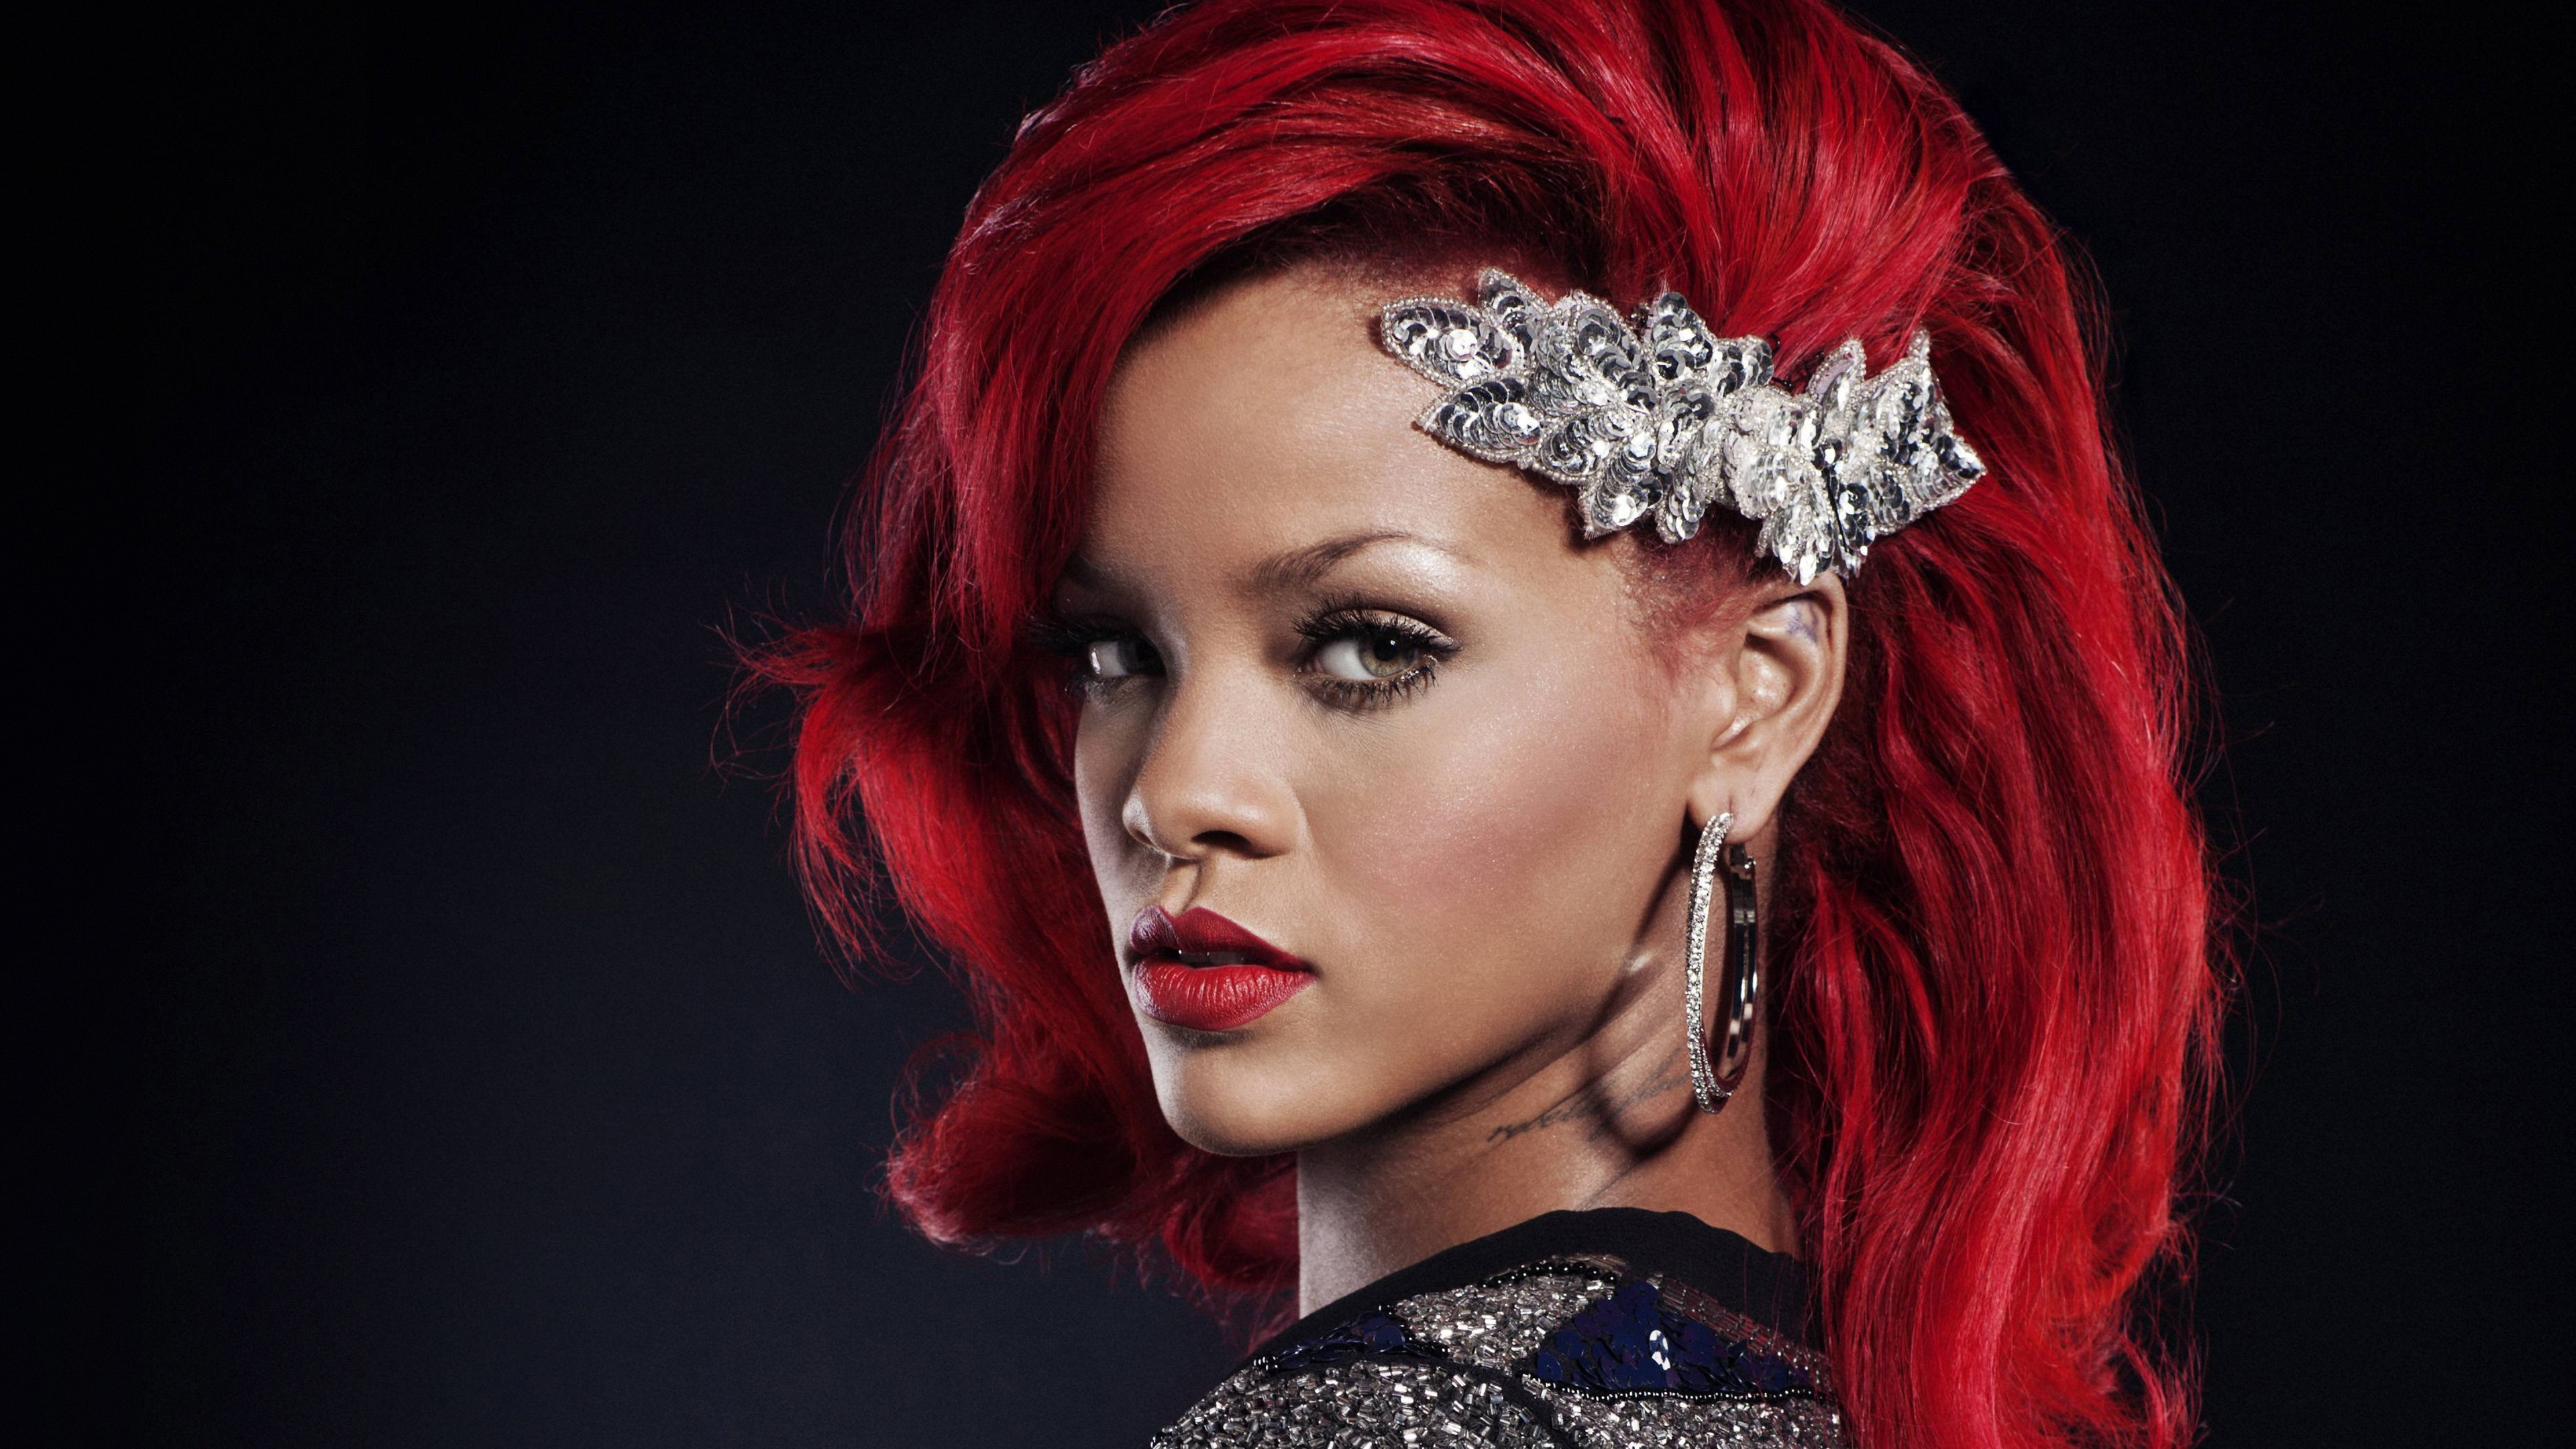 Download Rihanna, red colored hair, famous celebrity, singer wallpaper, 3840x 4K UHD 16: Widescreen